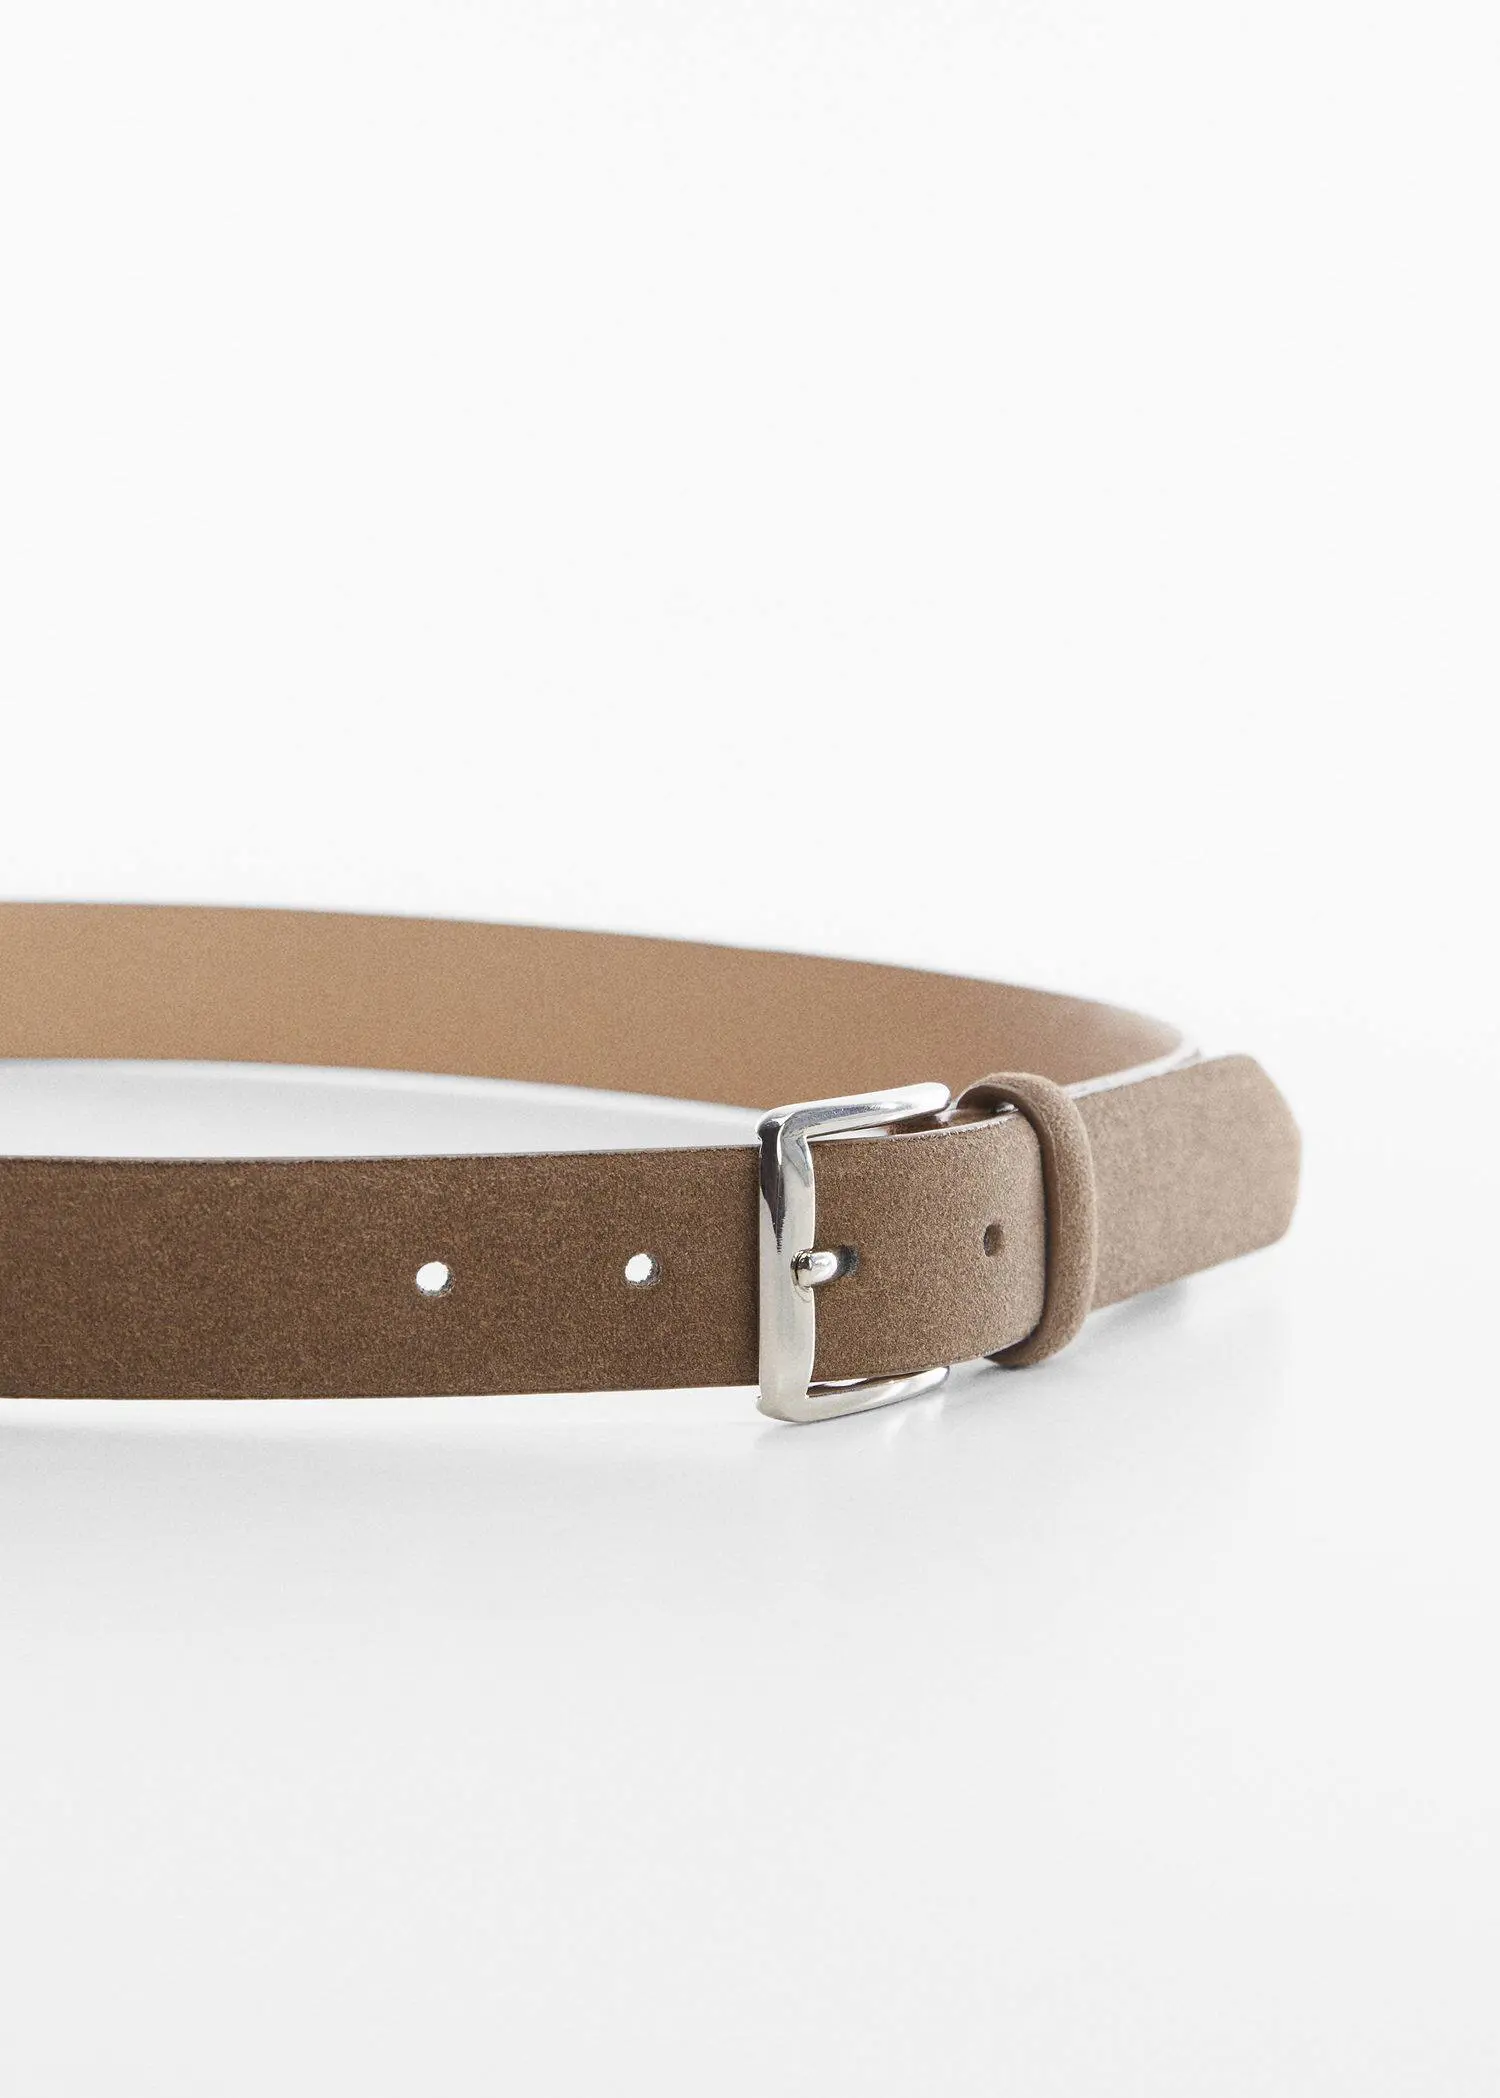 Mango Suede belt. a close-up of a brown leather belt with a silver buckle. 